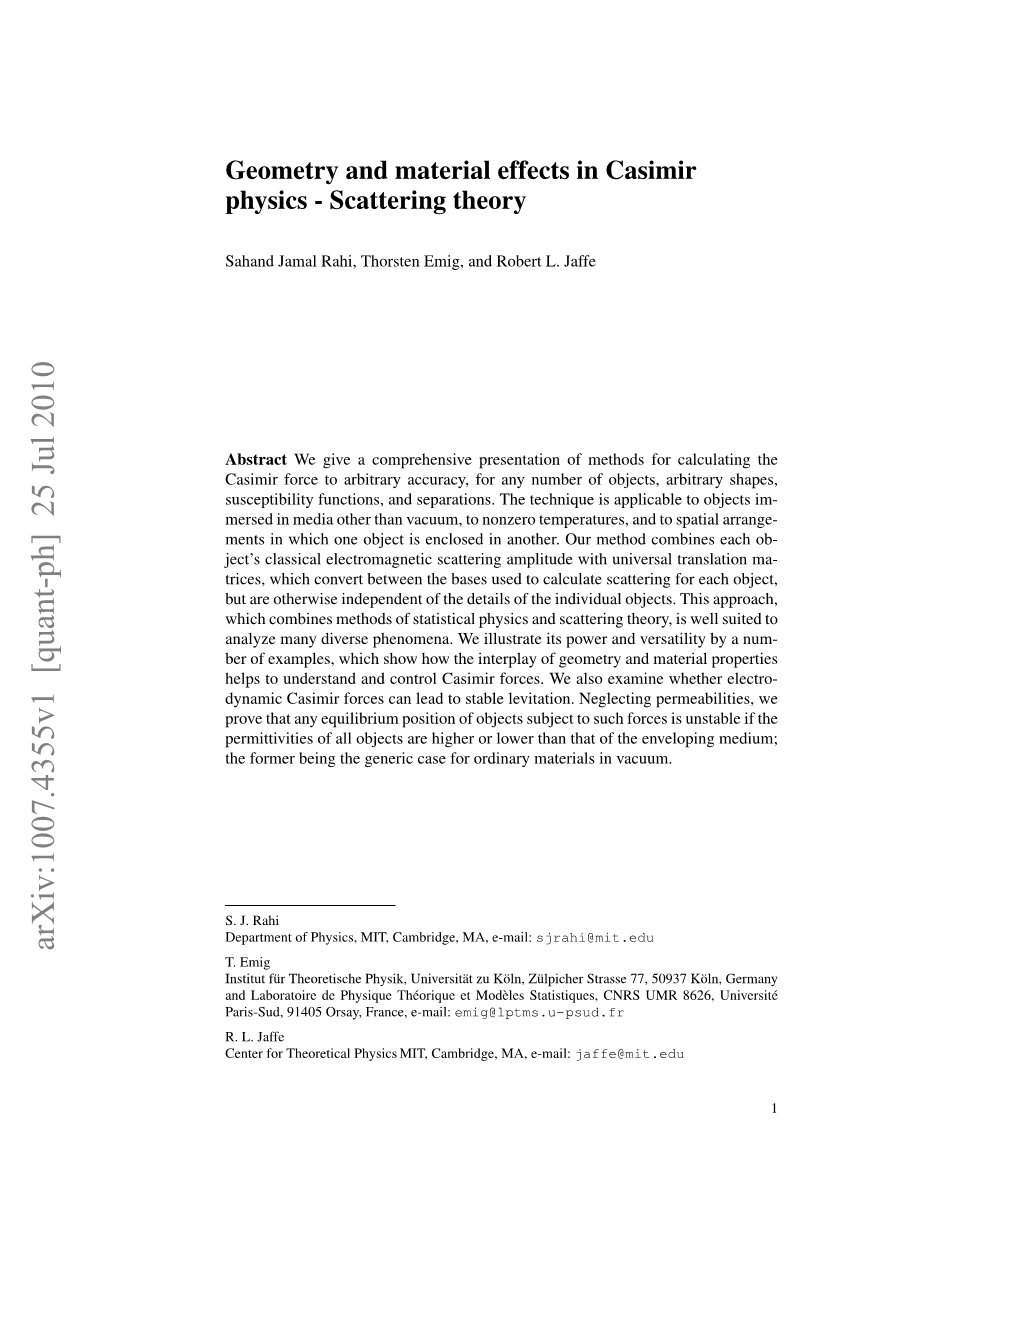 Geometry and Material Effects in Casimir Physics - Scattering Theory